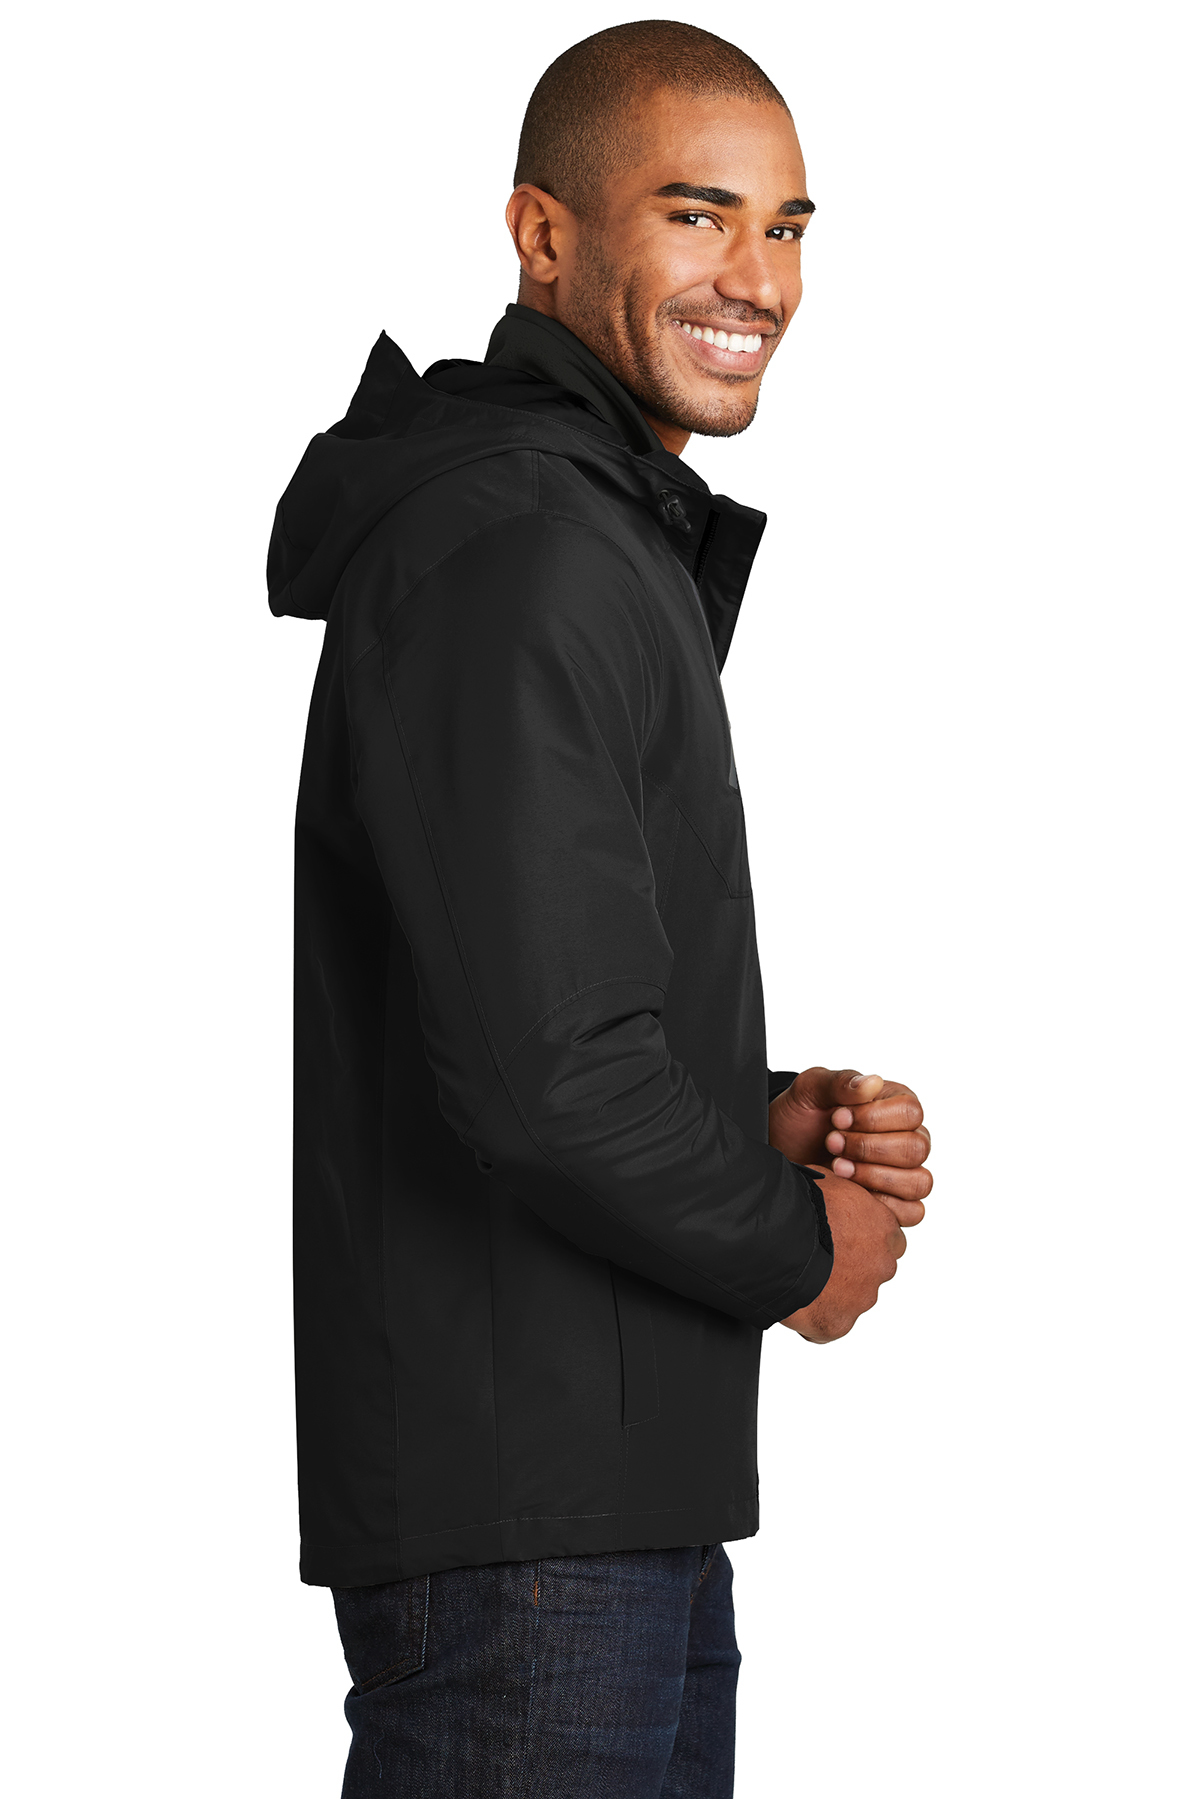 Port Authority Merge 3-in-1 Jacket | Product | Company Casuals